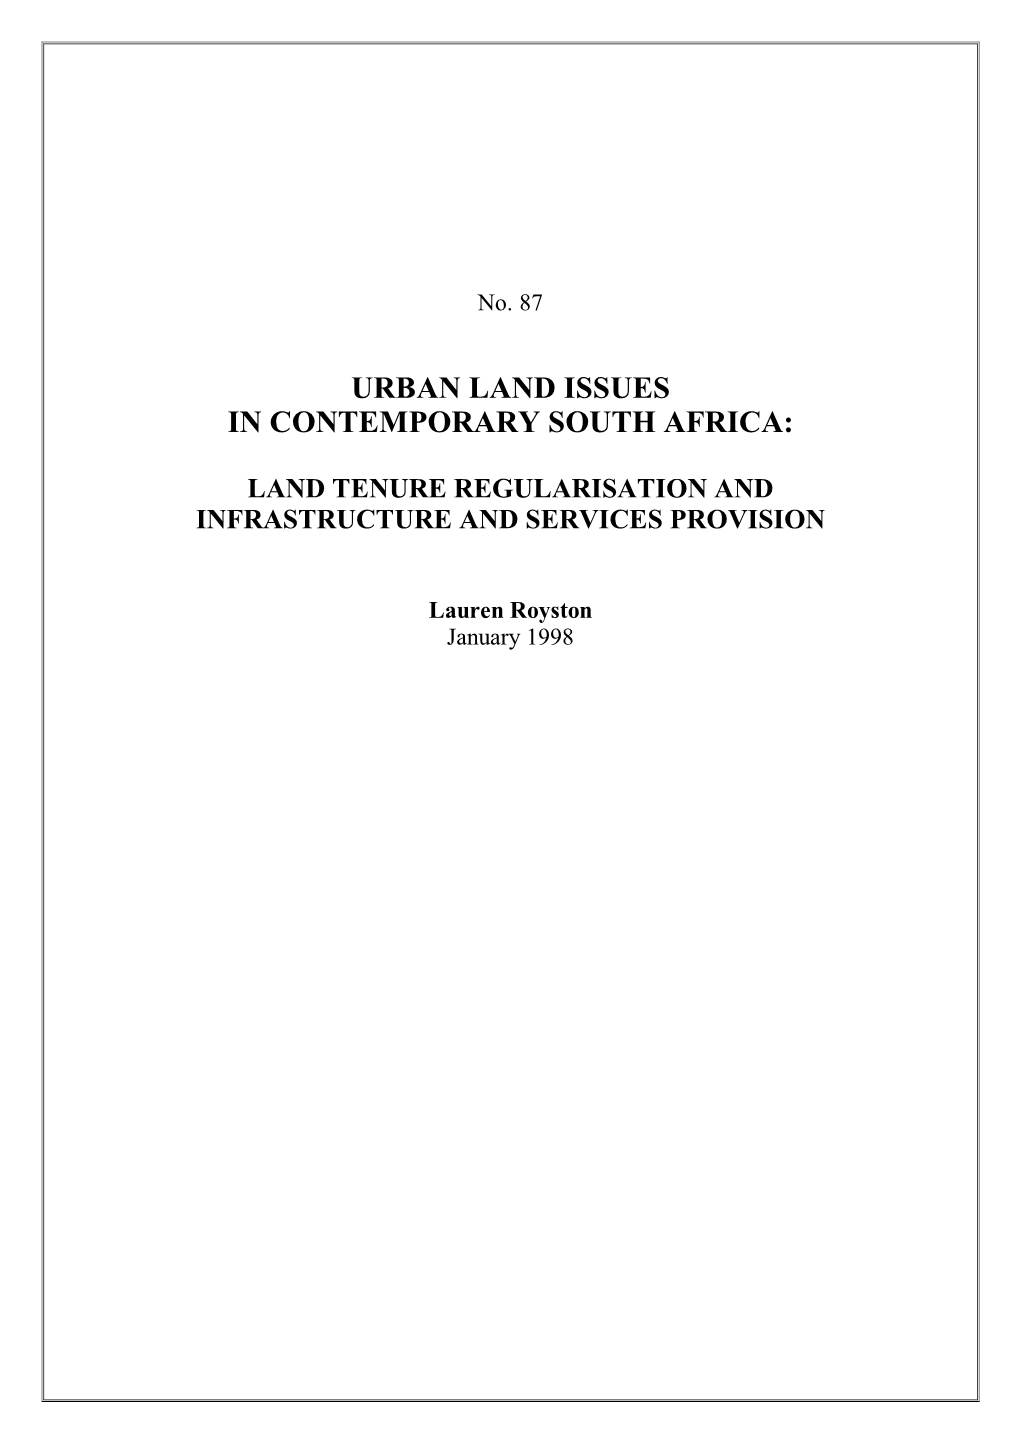 Urban Land Issues in Contemporary South Africa